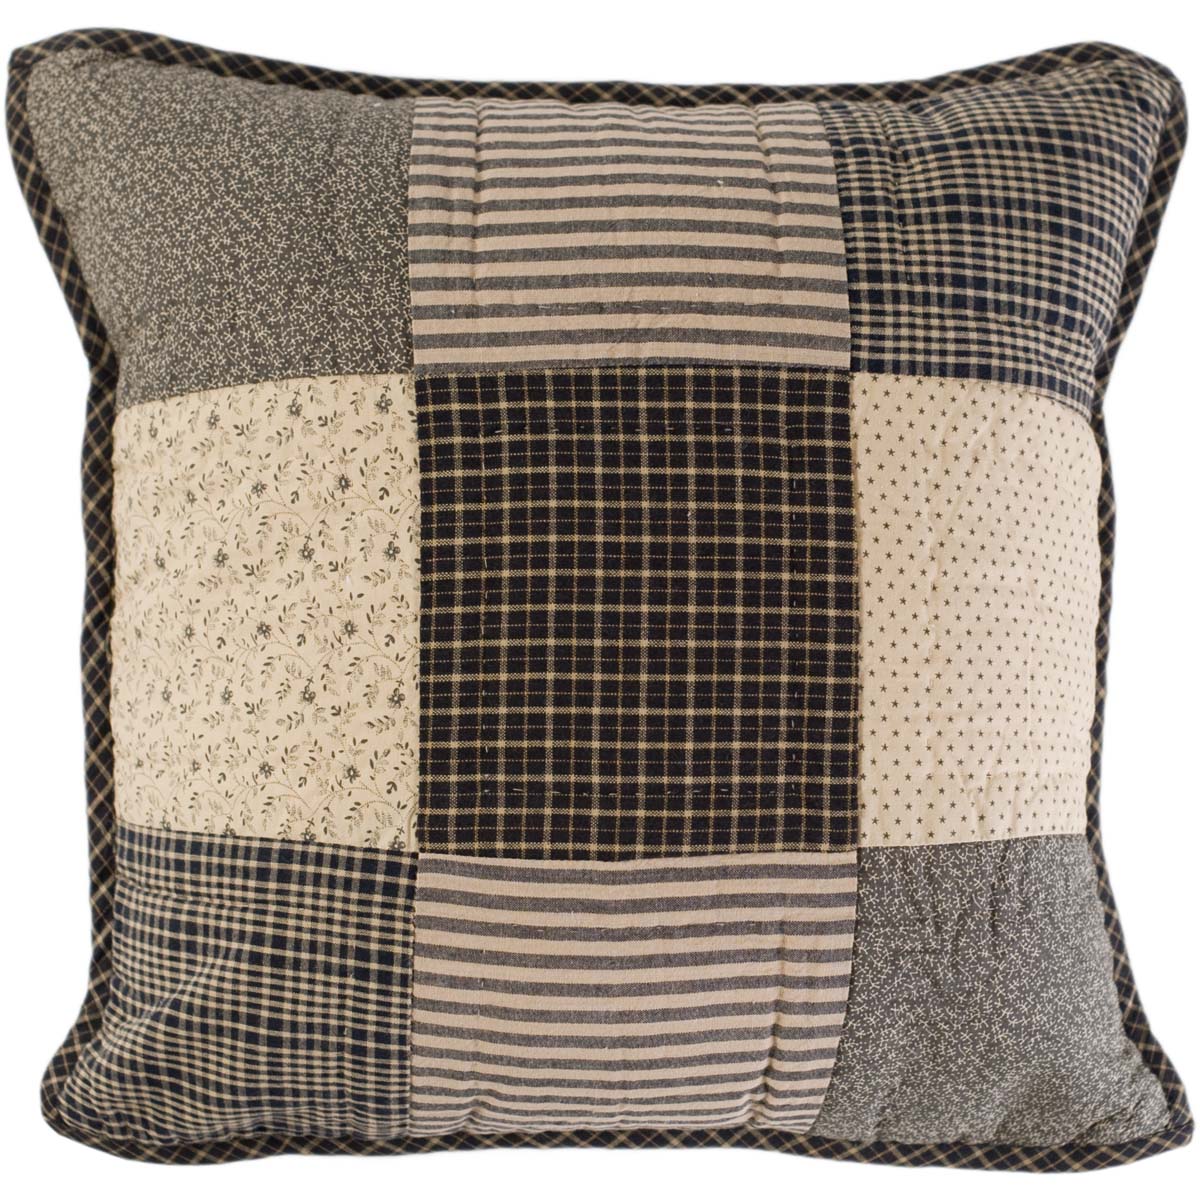 Kettle Grove Quilted Pillow 16x16